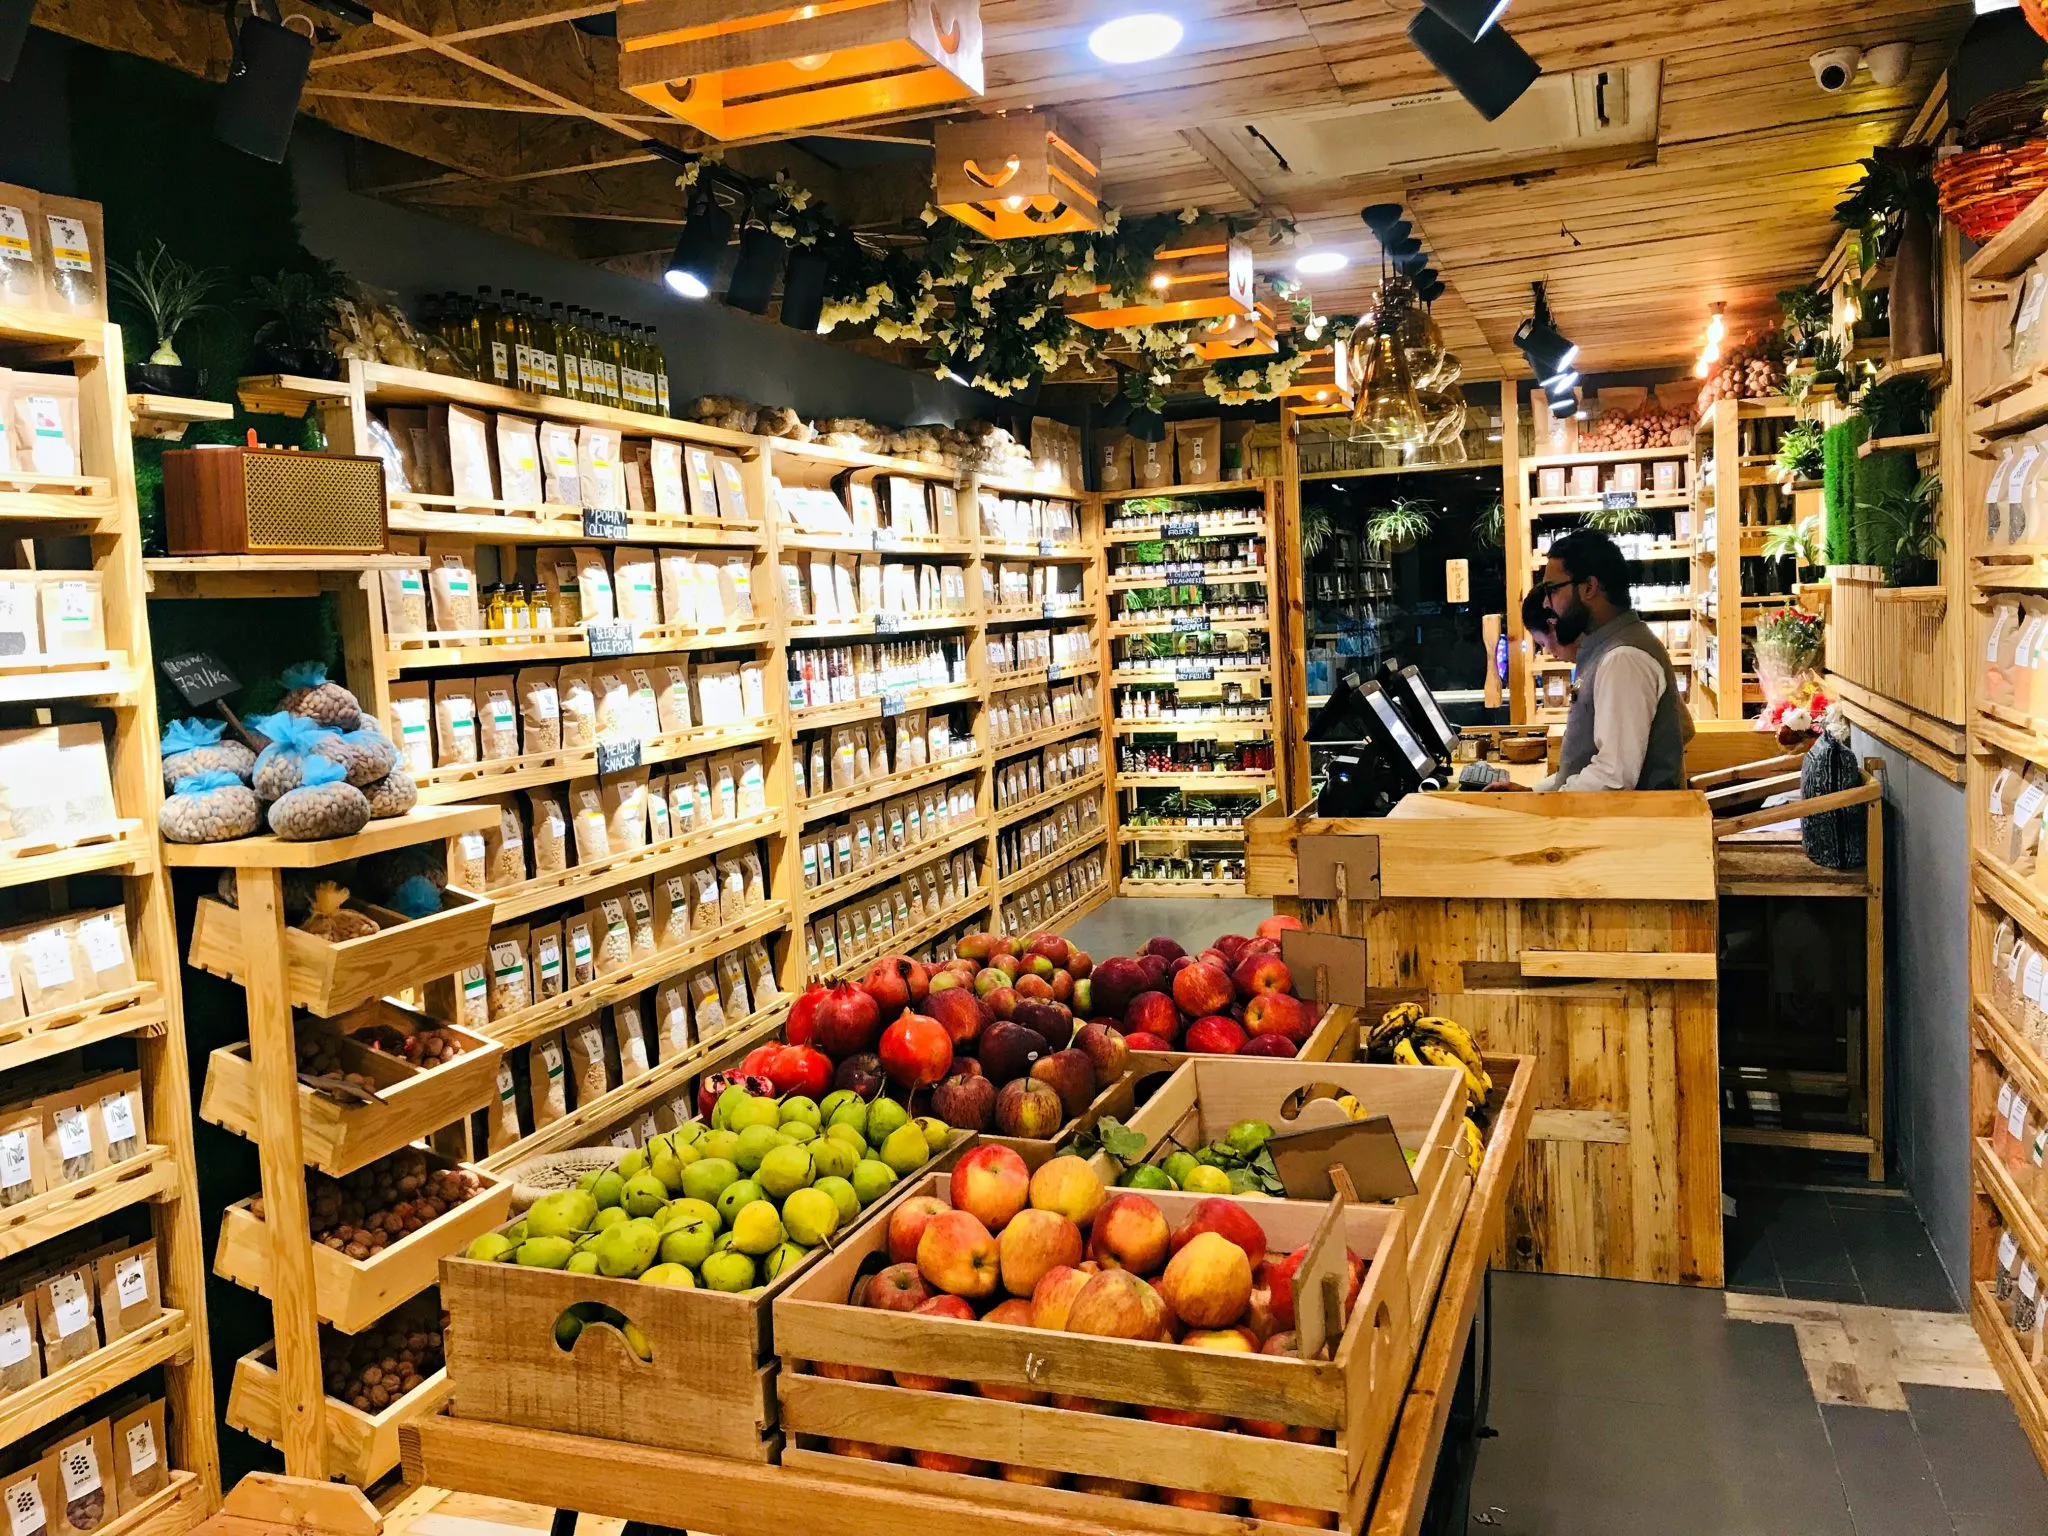 Tourist store displays with a variety of organic food and delicacies